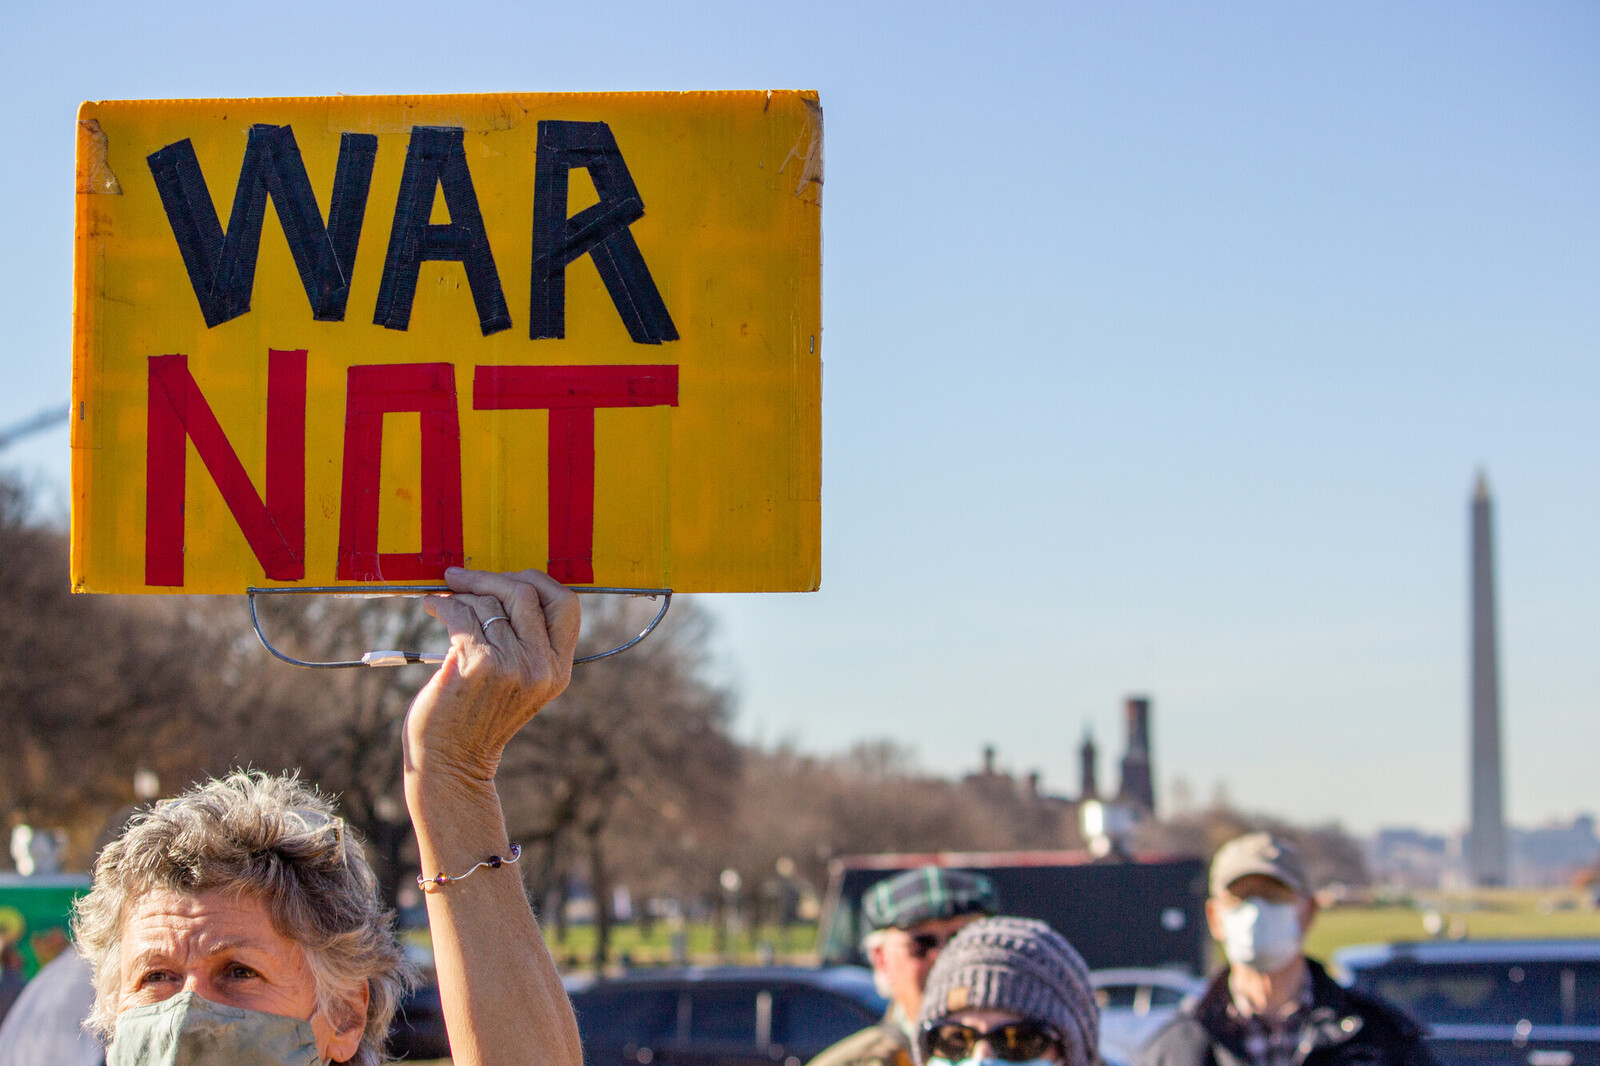 New study: Most in U.S. agree we should pursue diplomacy, not war